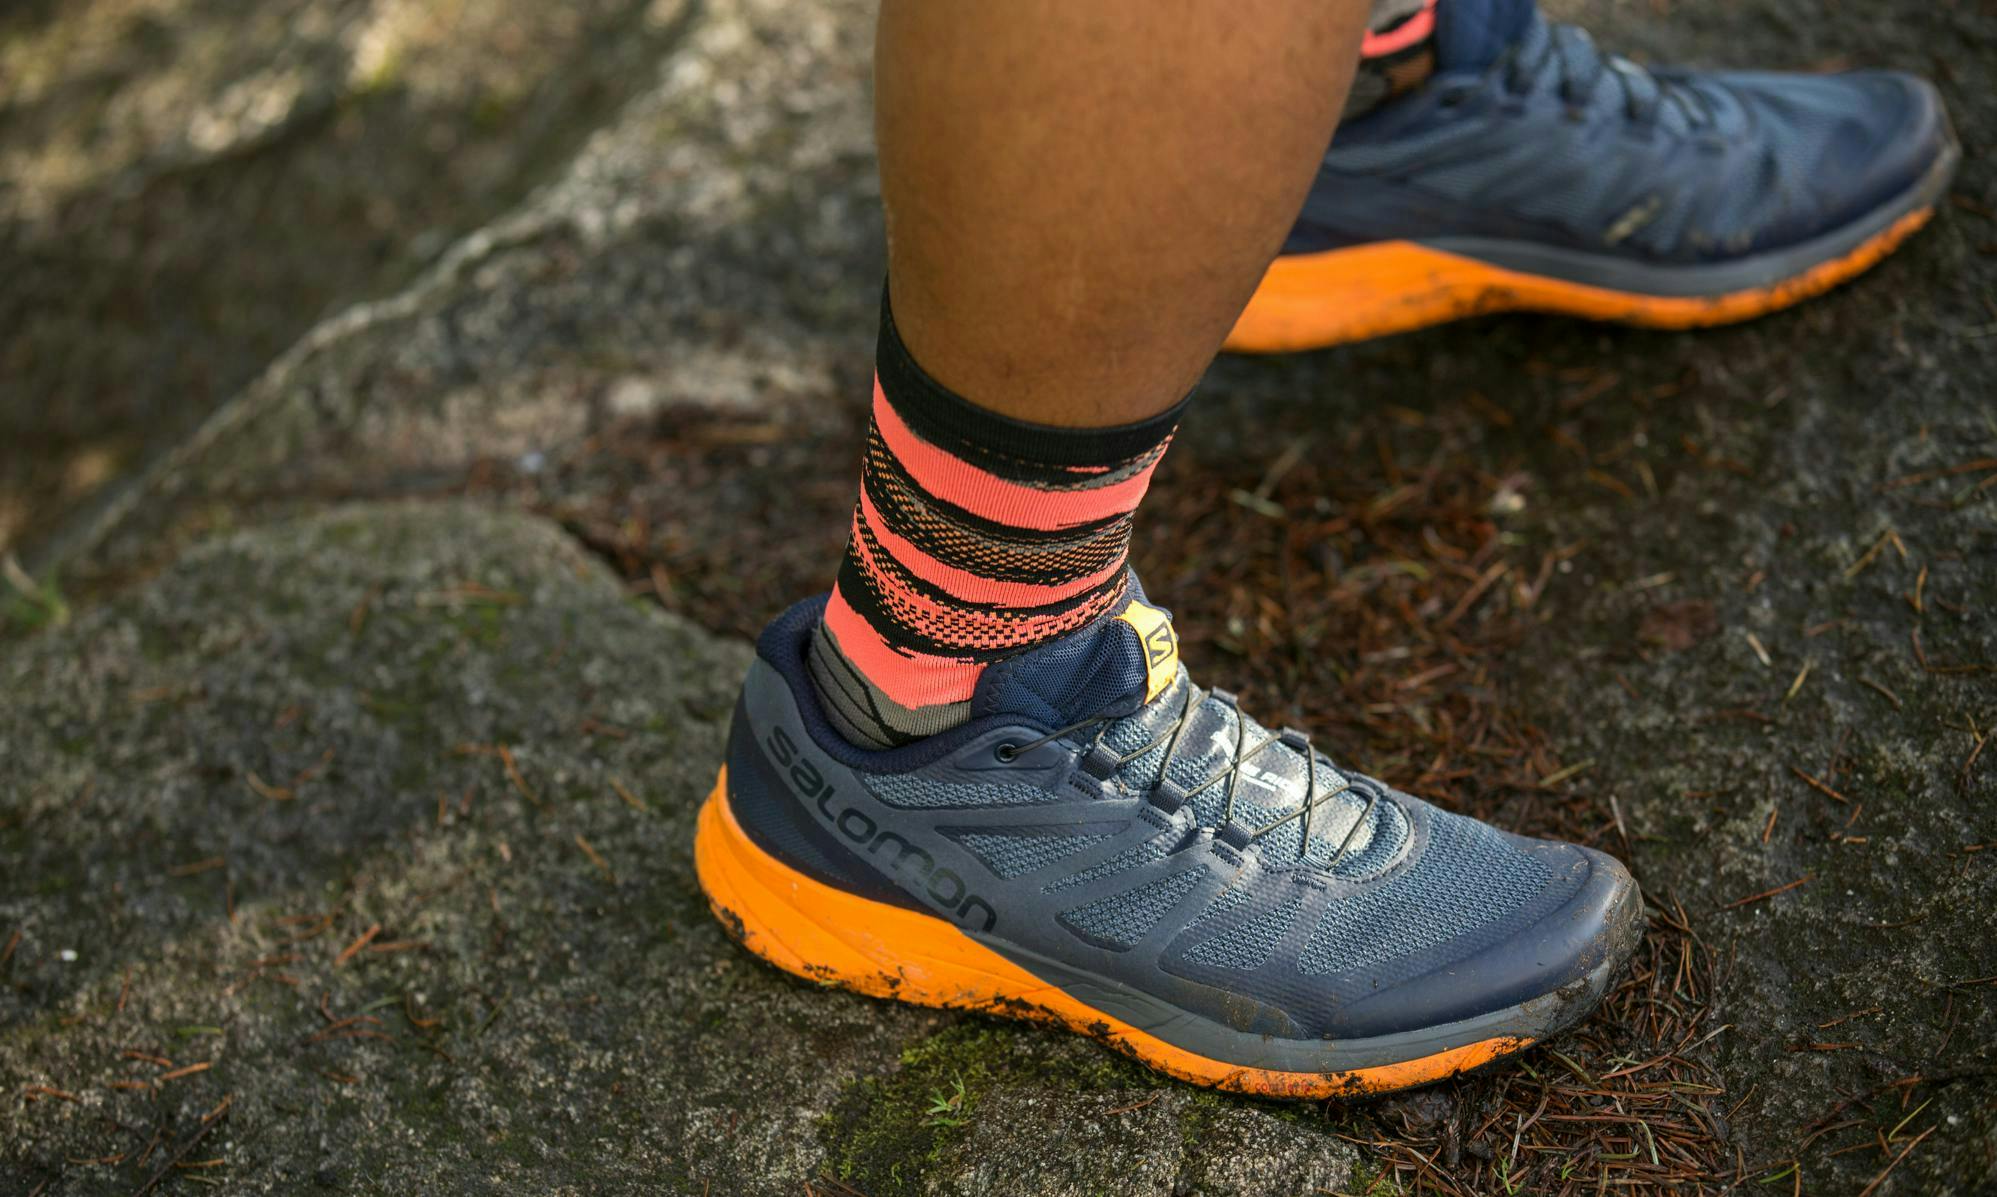 Trail running shoes with fun socks